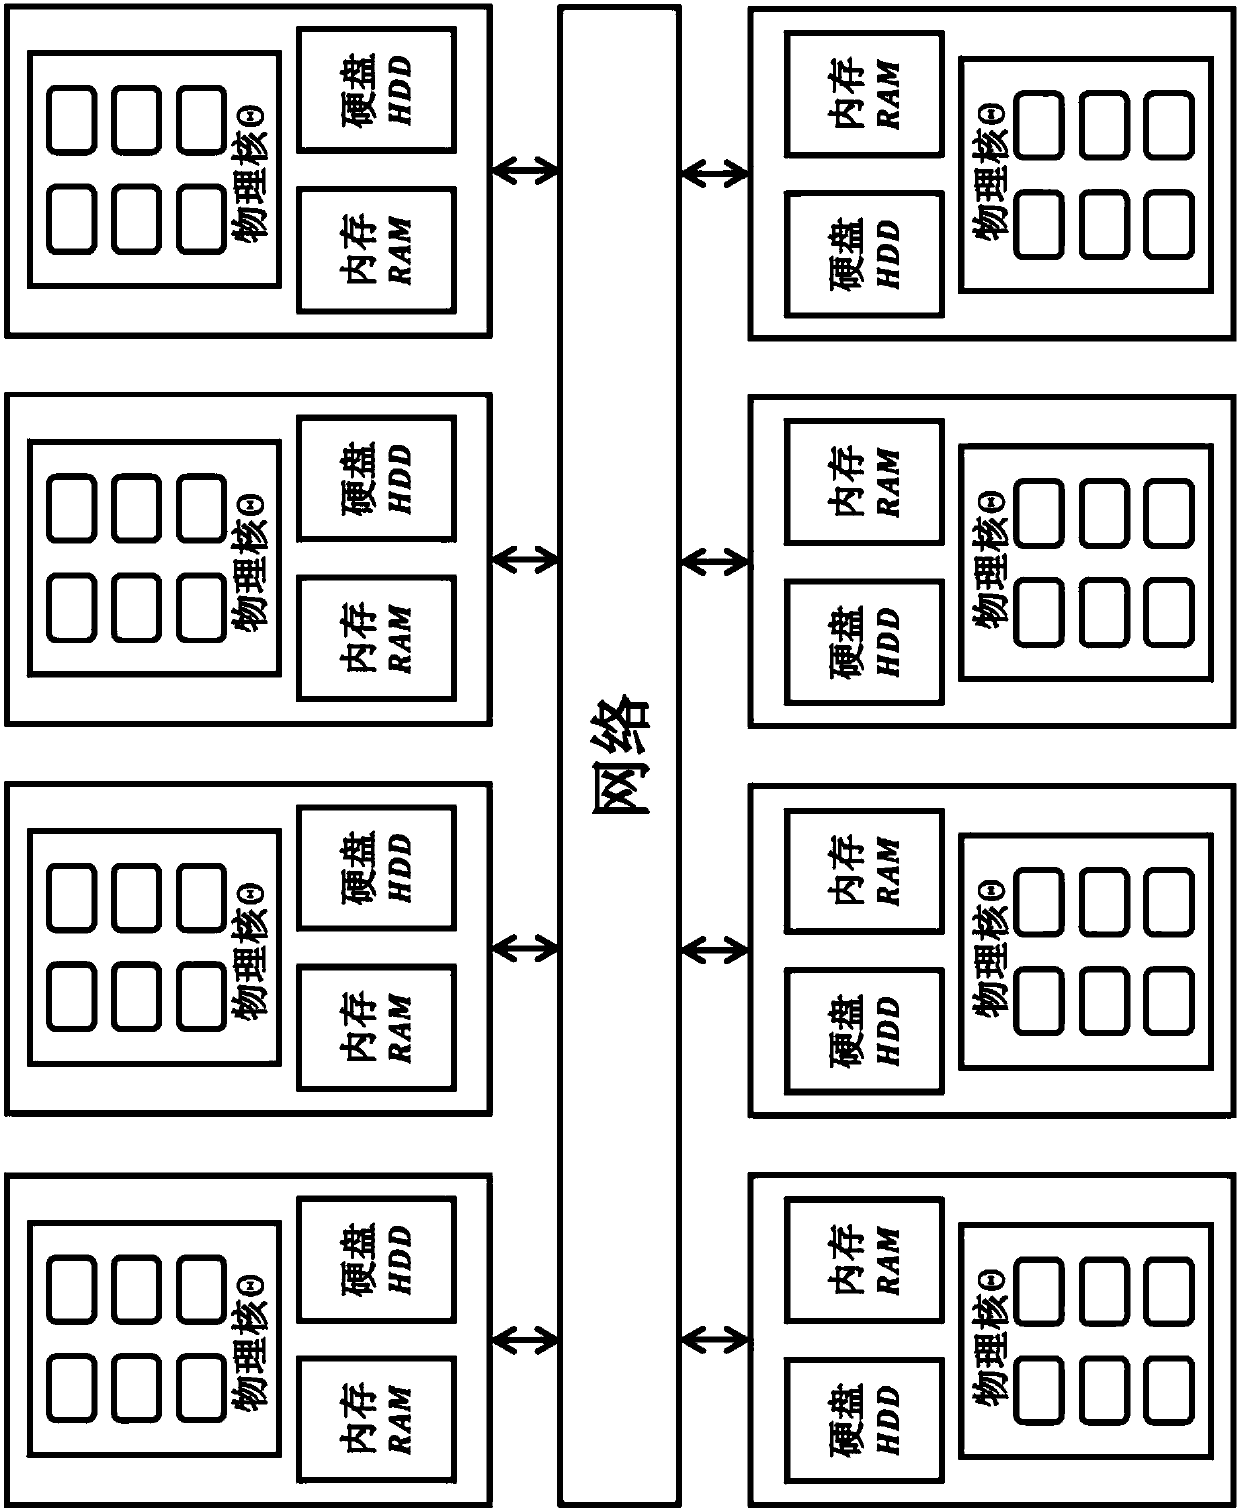 Reservoir group scheduling parallel dynamic planning method considering computing resource economy and feasibility